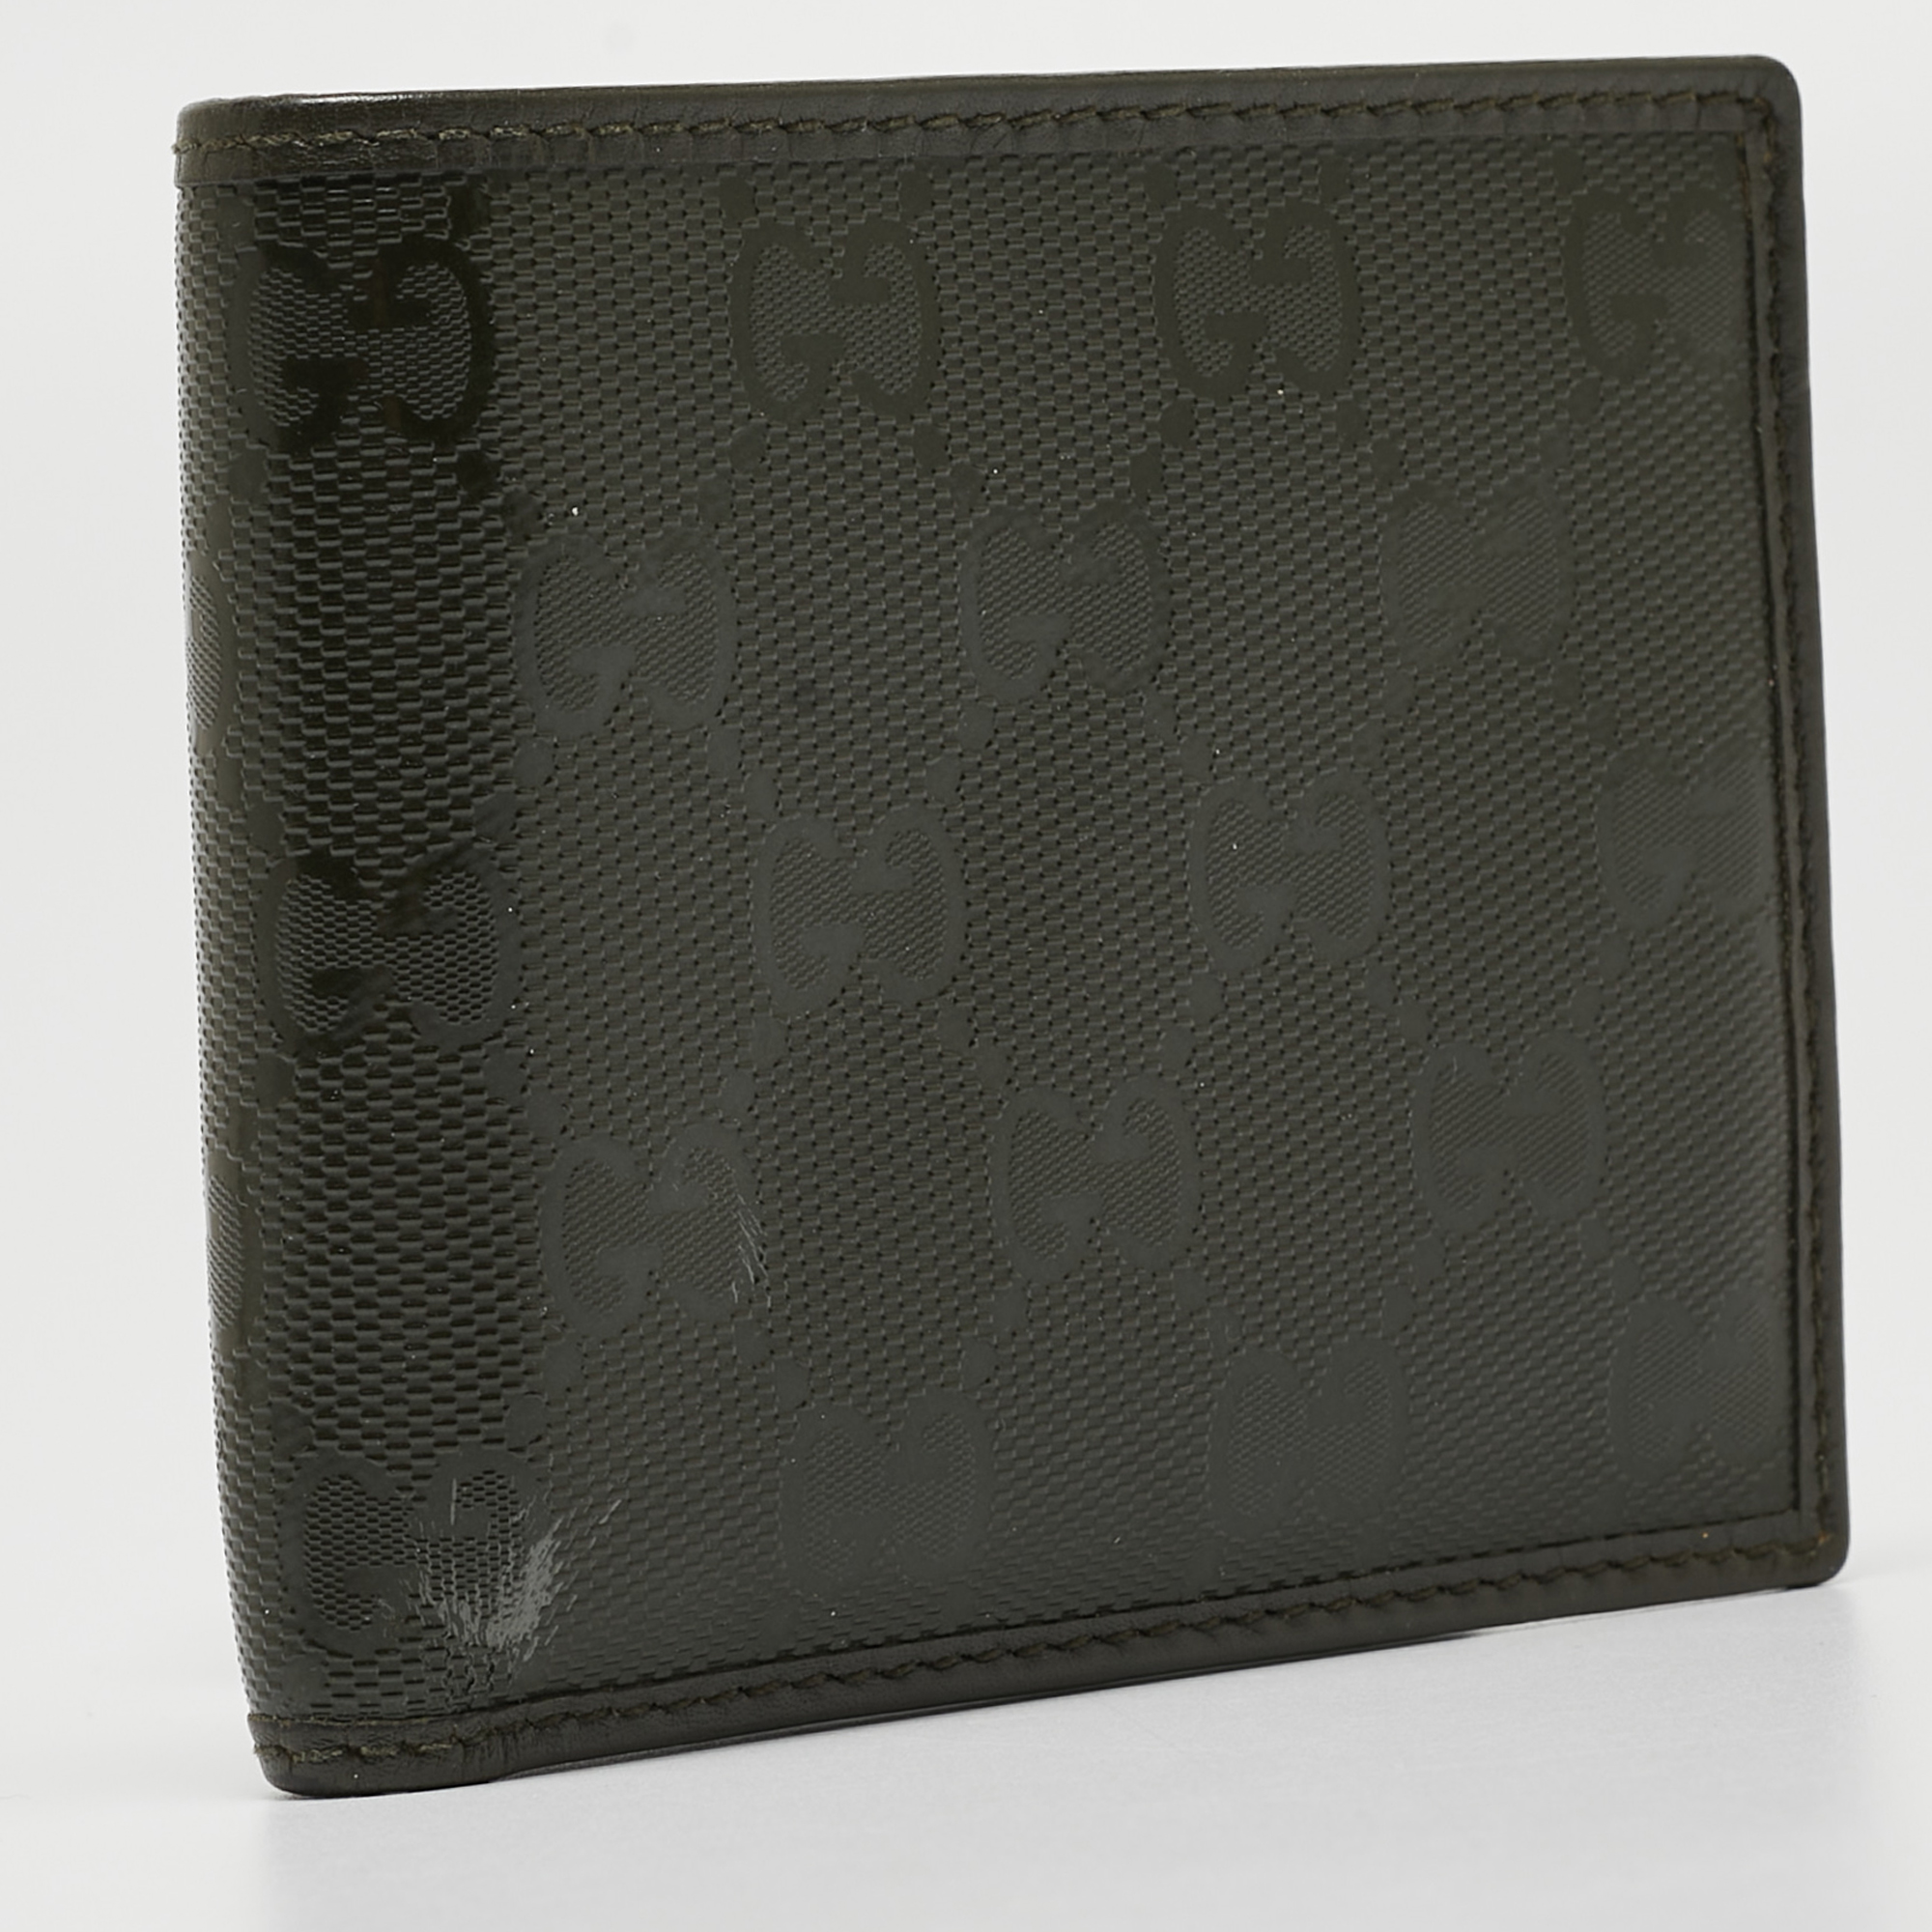 Gucci Military Green GG Imprime Canvas Bifold Wallet